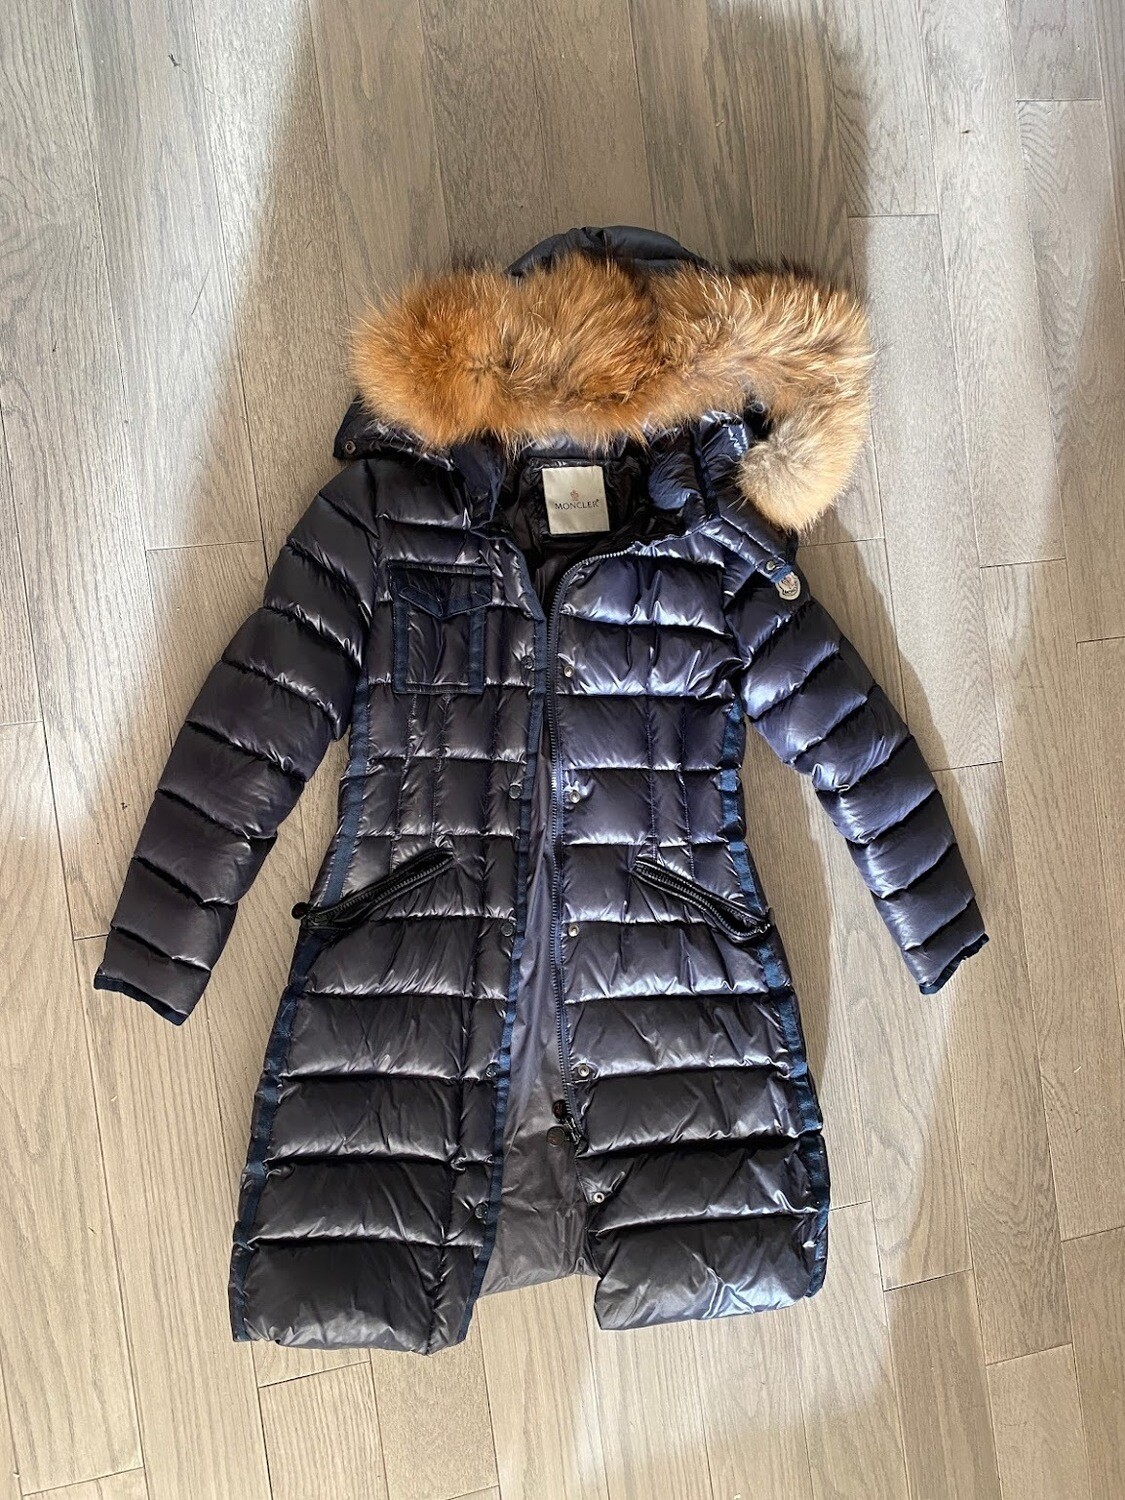 IN STOCK 1:1 Moncler Down Coat Jacket -Long Navy Size XS/S